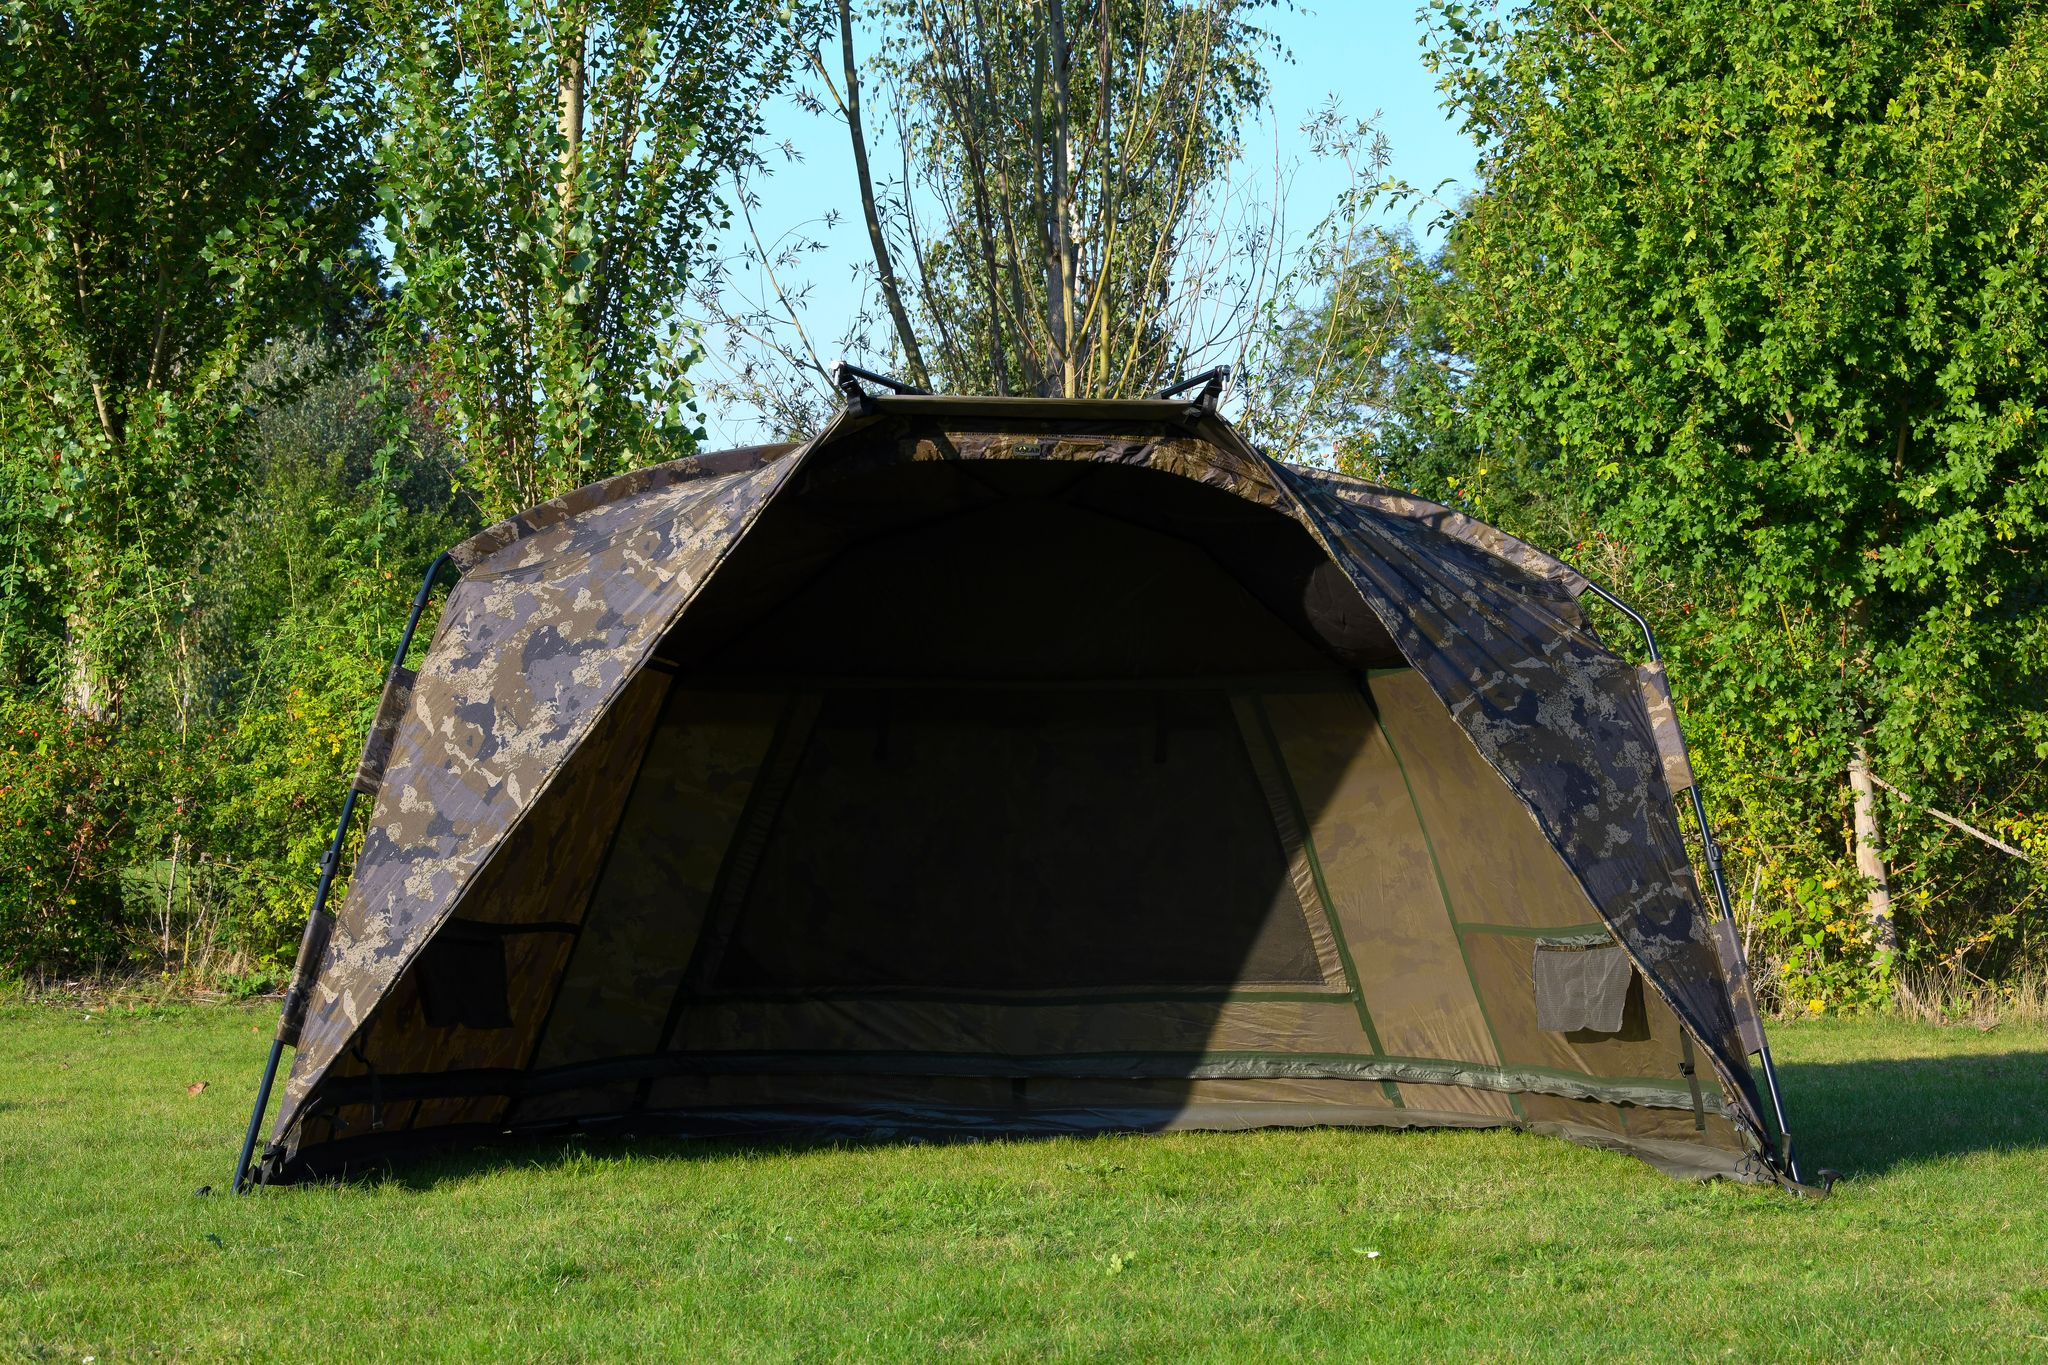 Solar Camo Compact Spider Shelter (No Front Or Groundsheet)